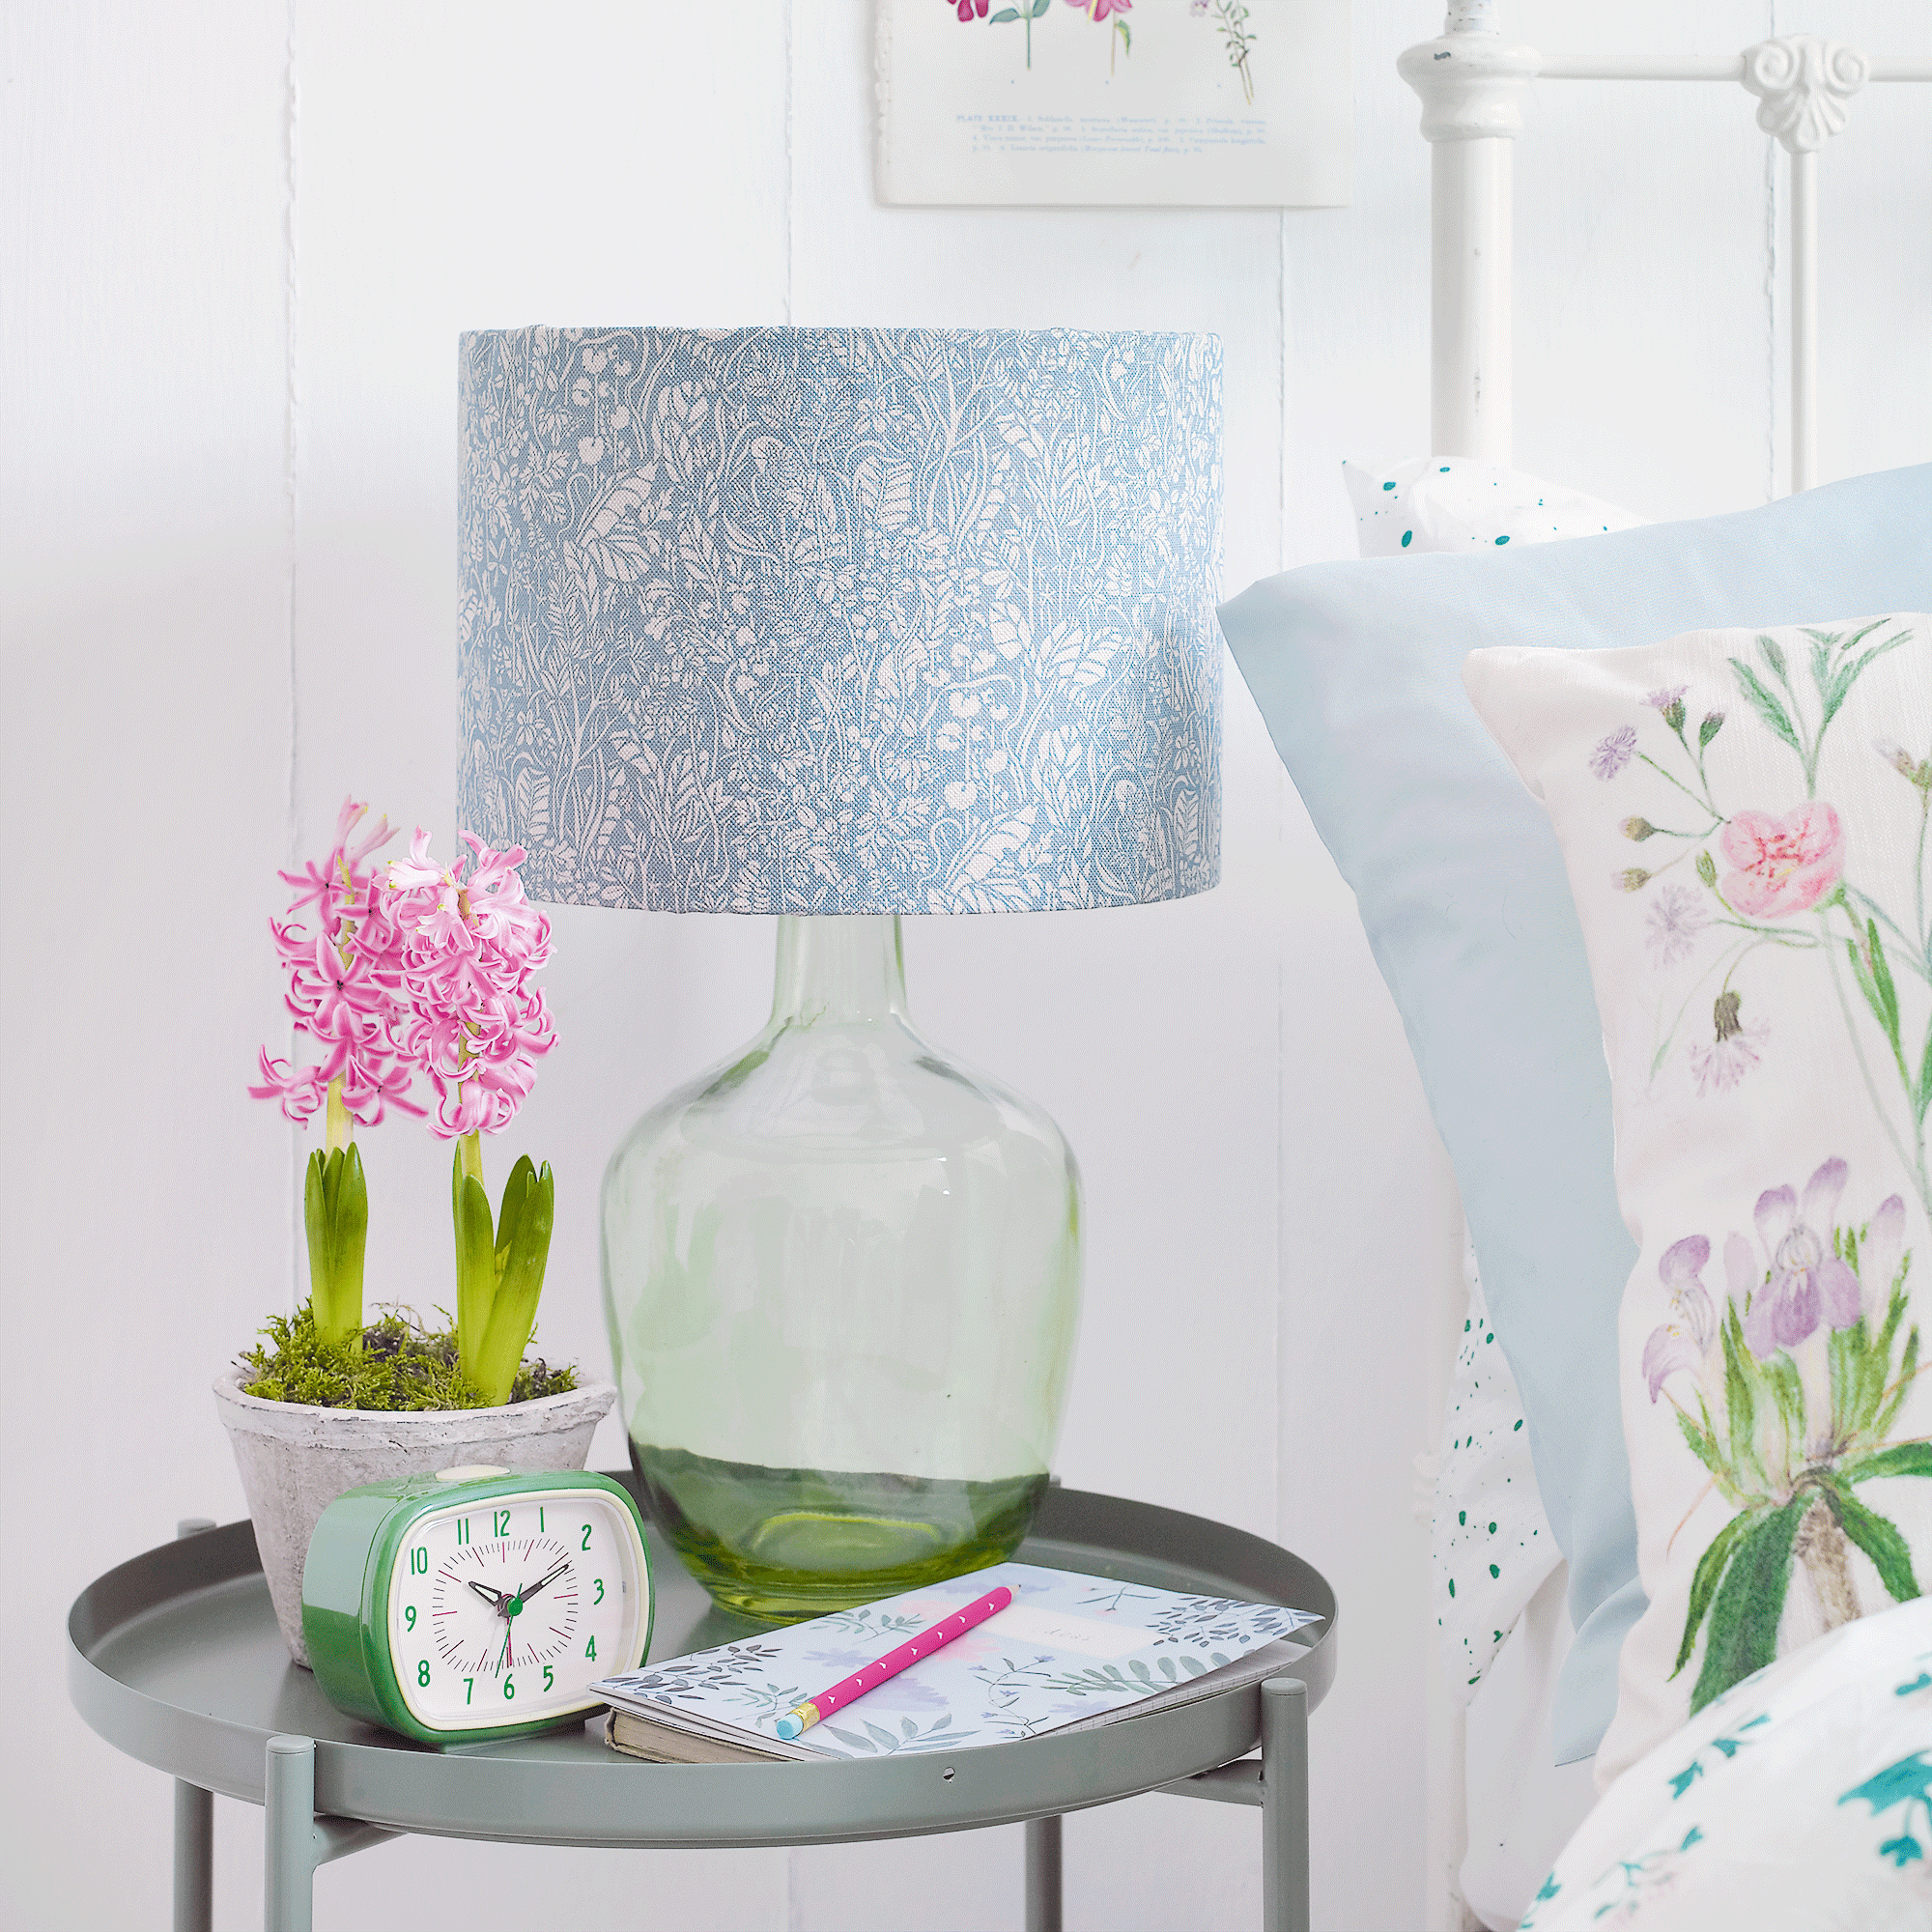 Hyacinth on side table with lamp